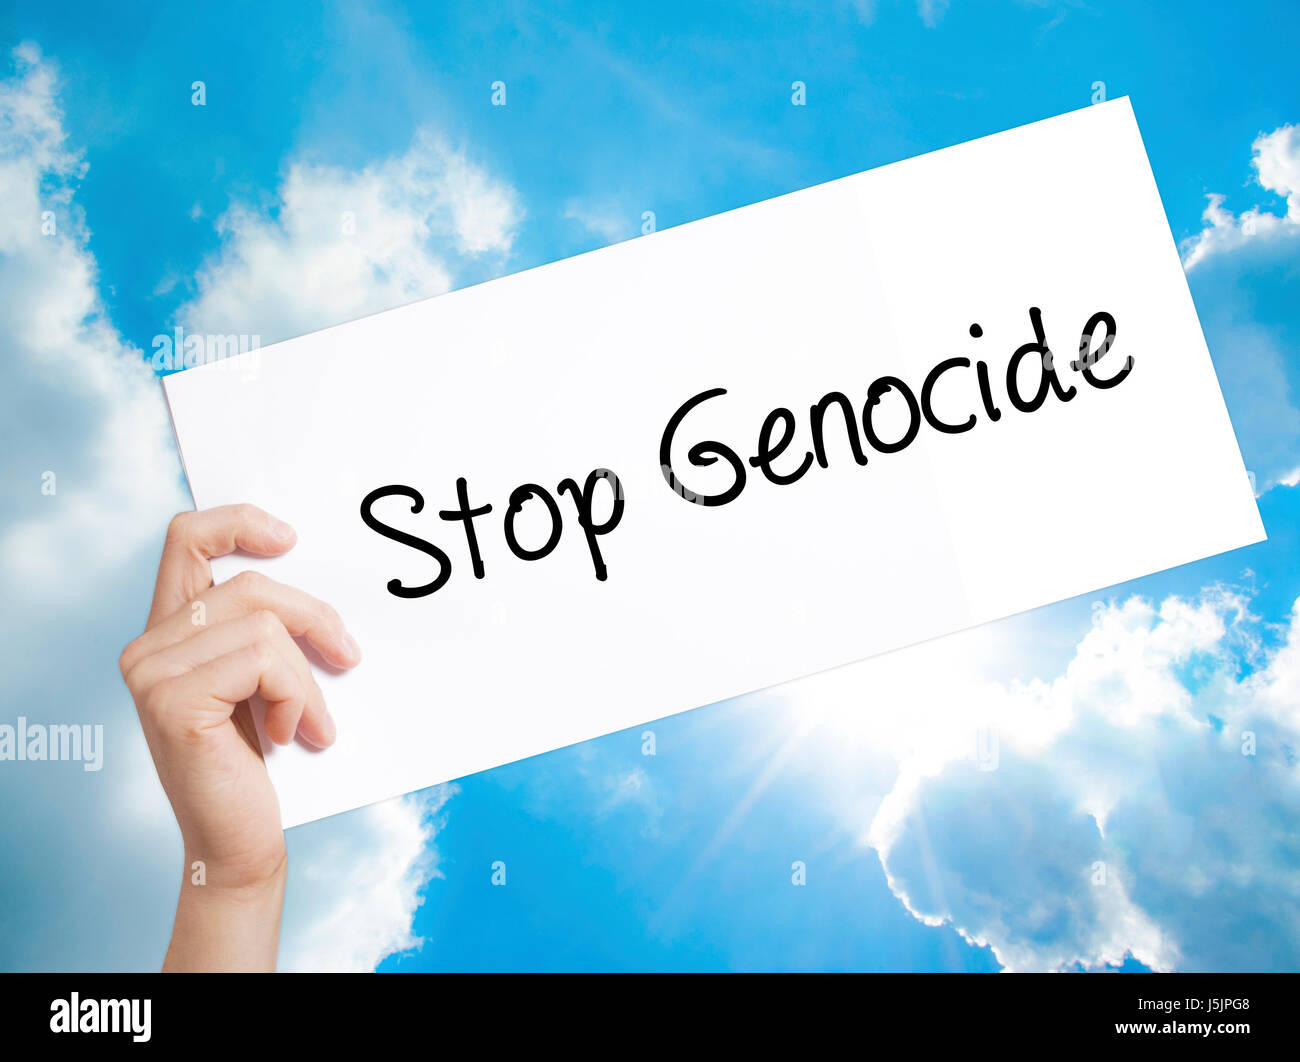 Stop Genocide Sign on white paper. Man Hand Holding Paper with text. Isolated on sky background.  Business concept. Stock Photo Stock Photo